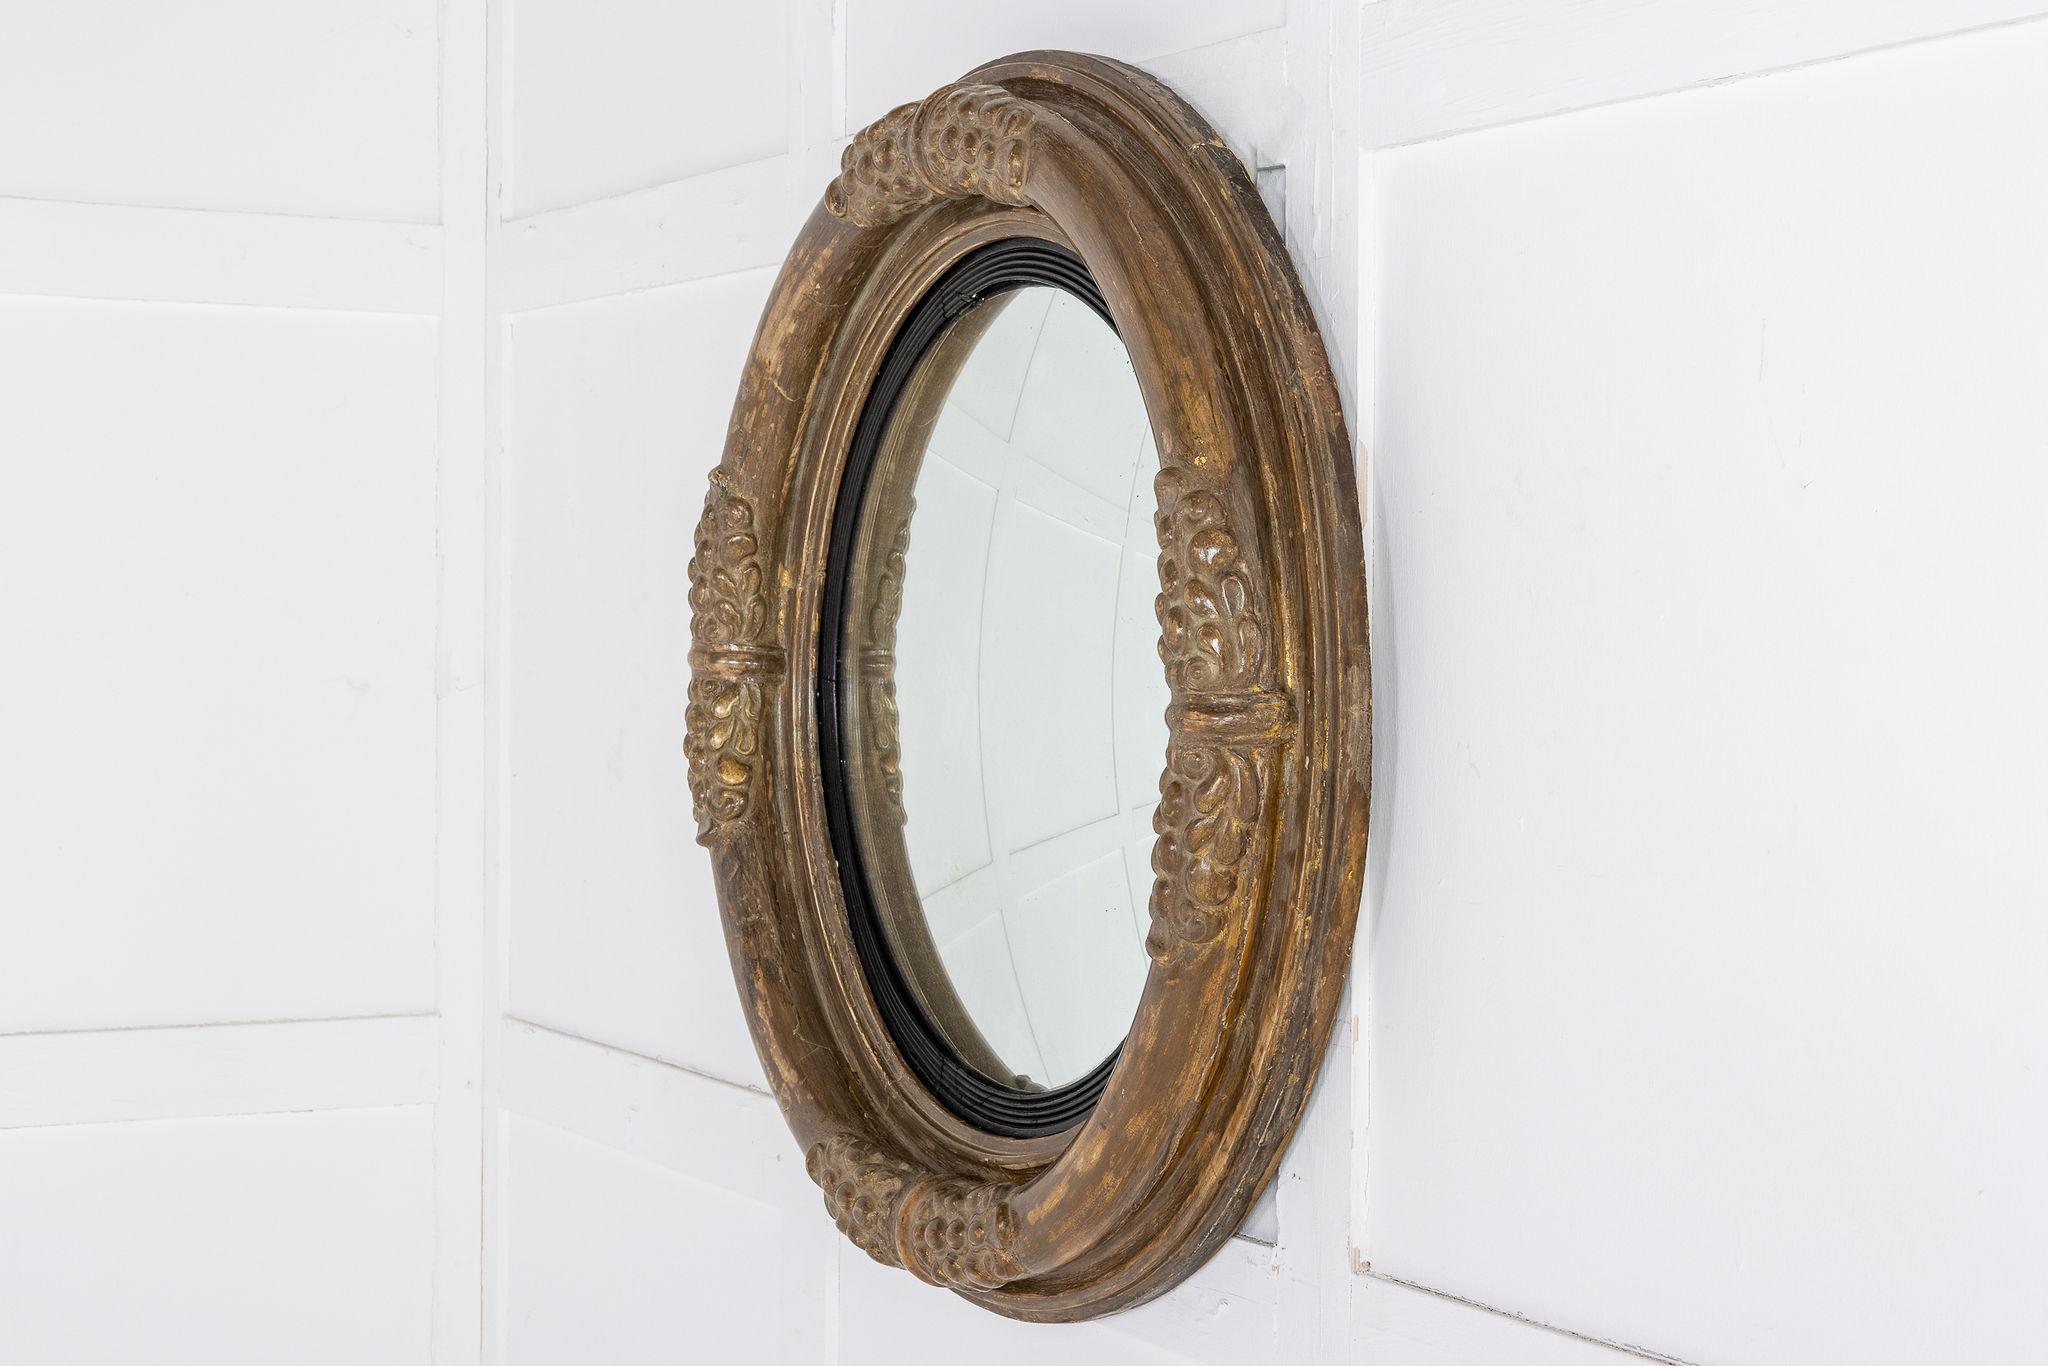 The mirror of typical convex form but retaining much of the original gilding and a charming worn surface. The outer moulding is carved with flowers or fruit in the centre of each “side” and this is probably meant to symbolise cornucopias or horns of